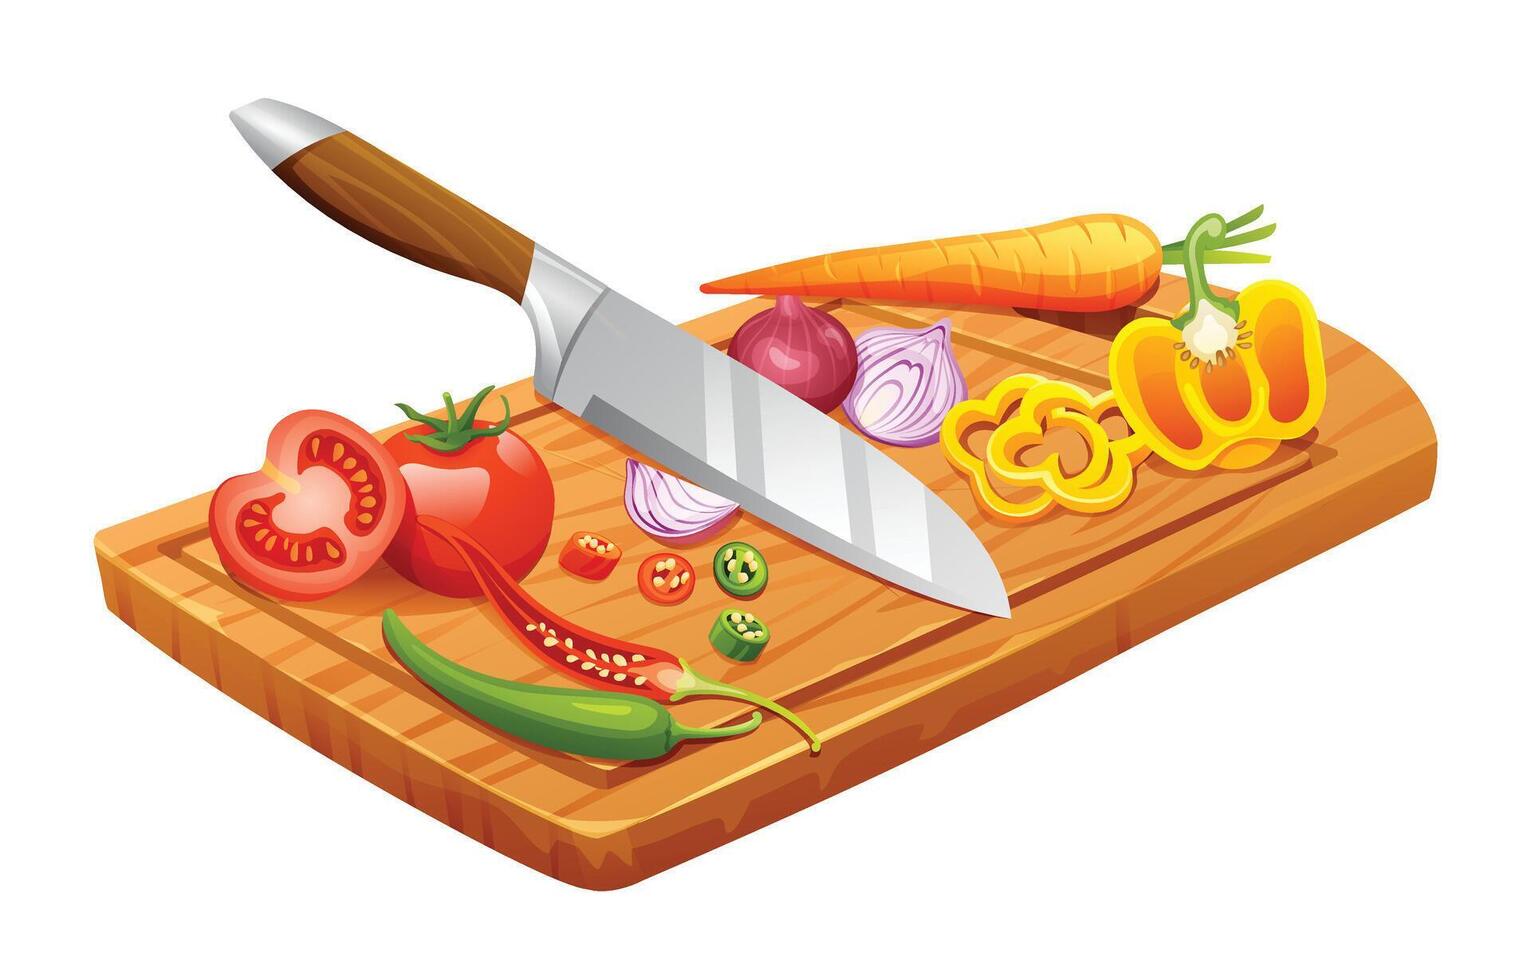 Food ingredients with knife on cutting board. Vector illustration isolated on white background